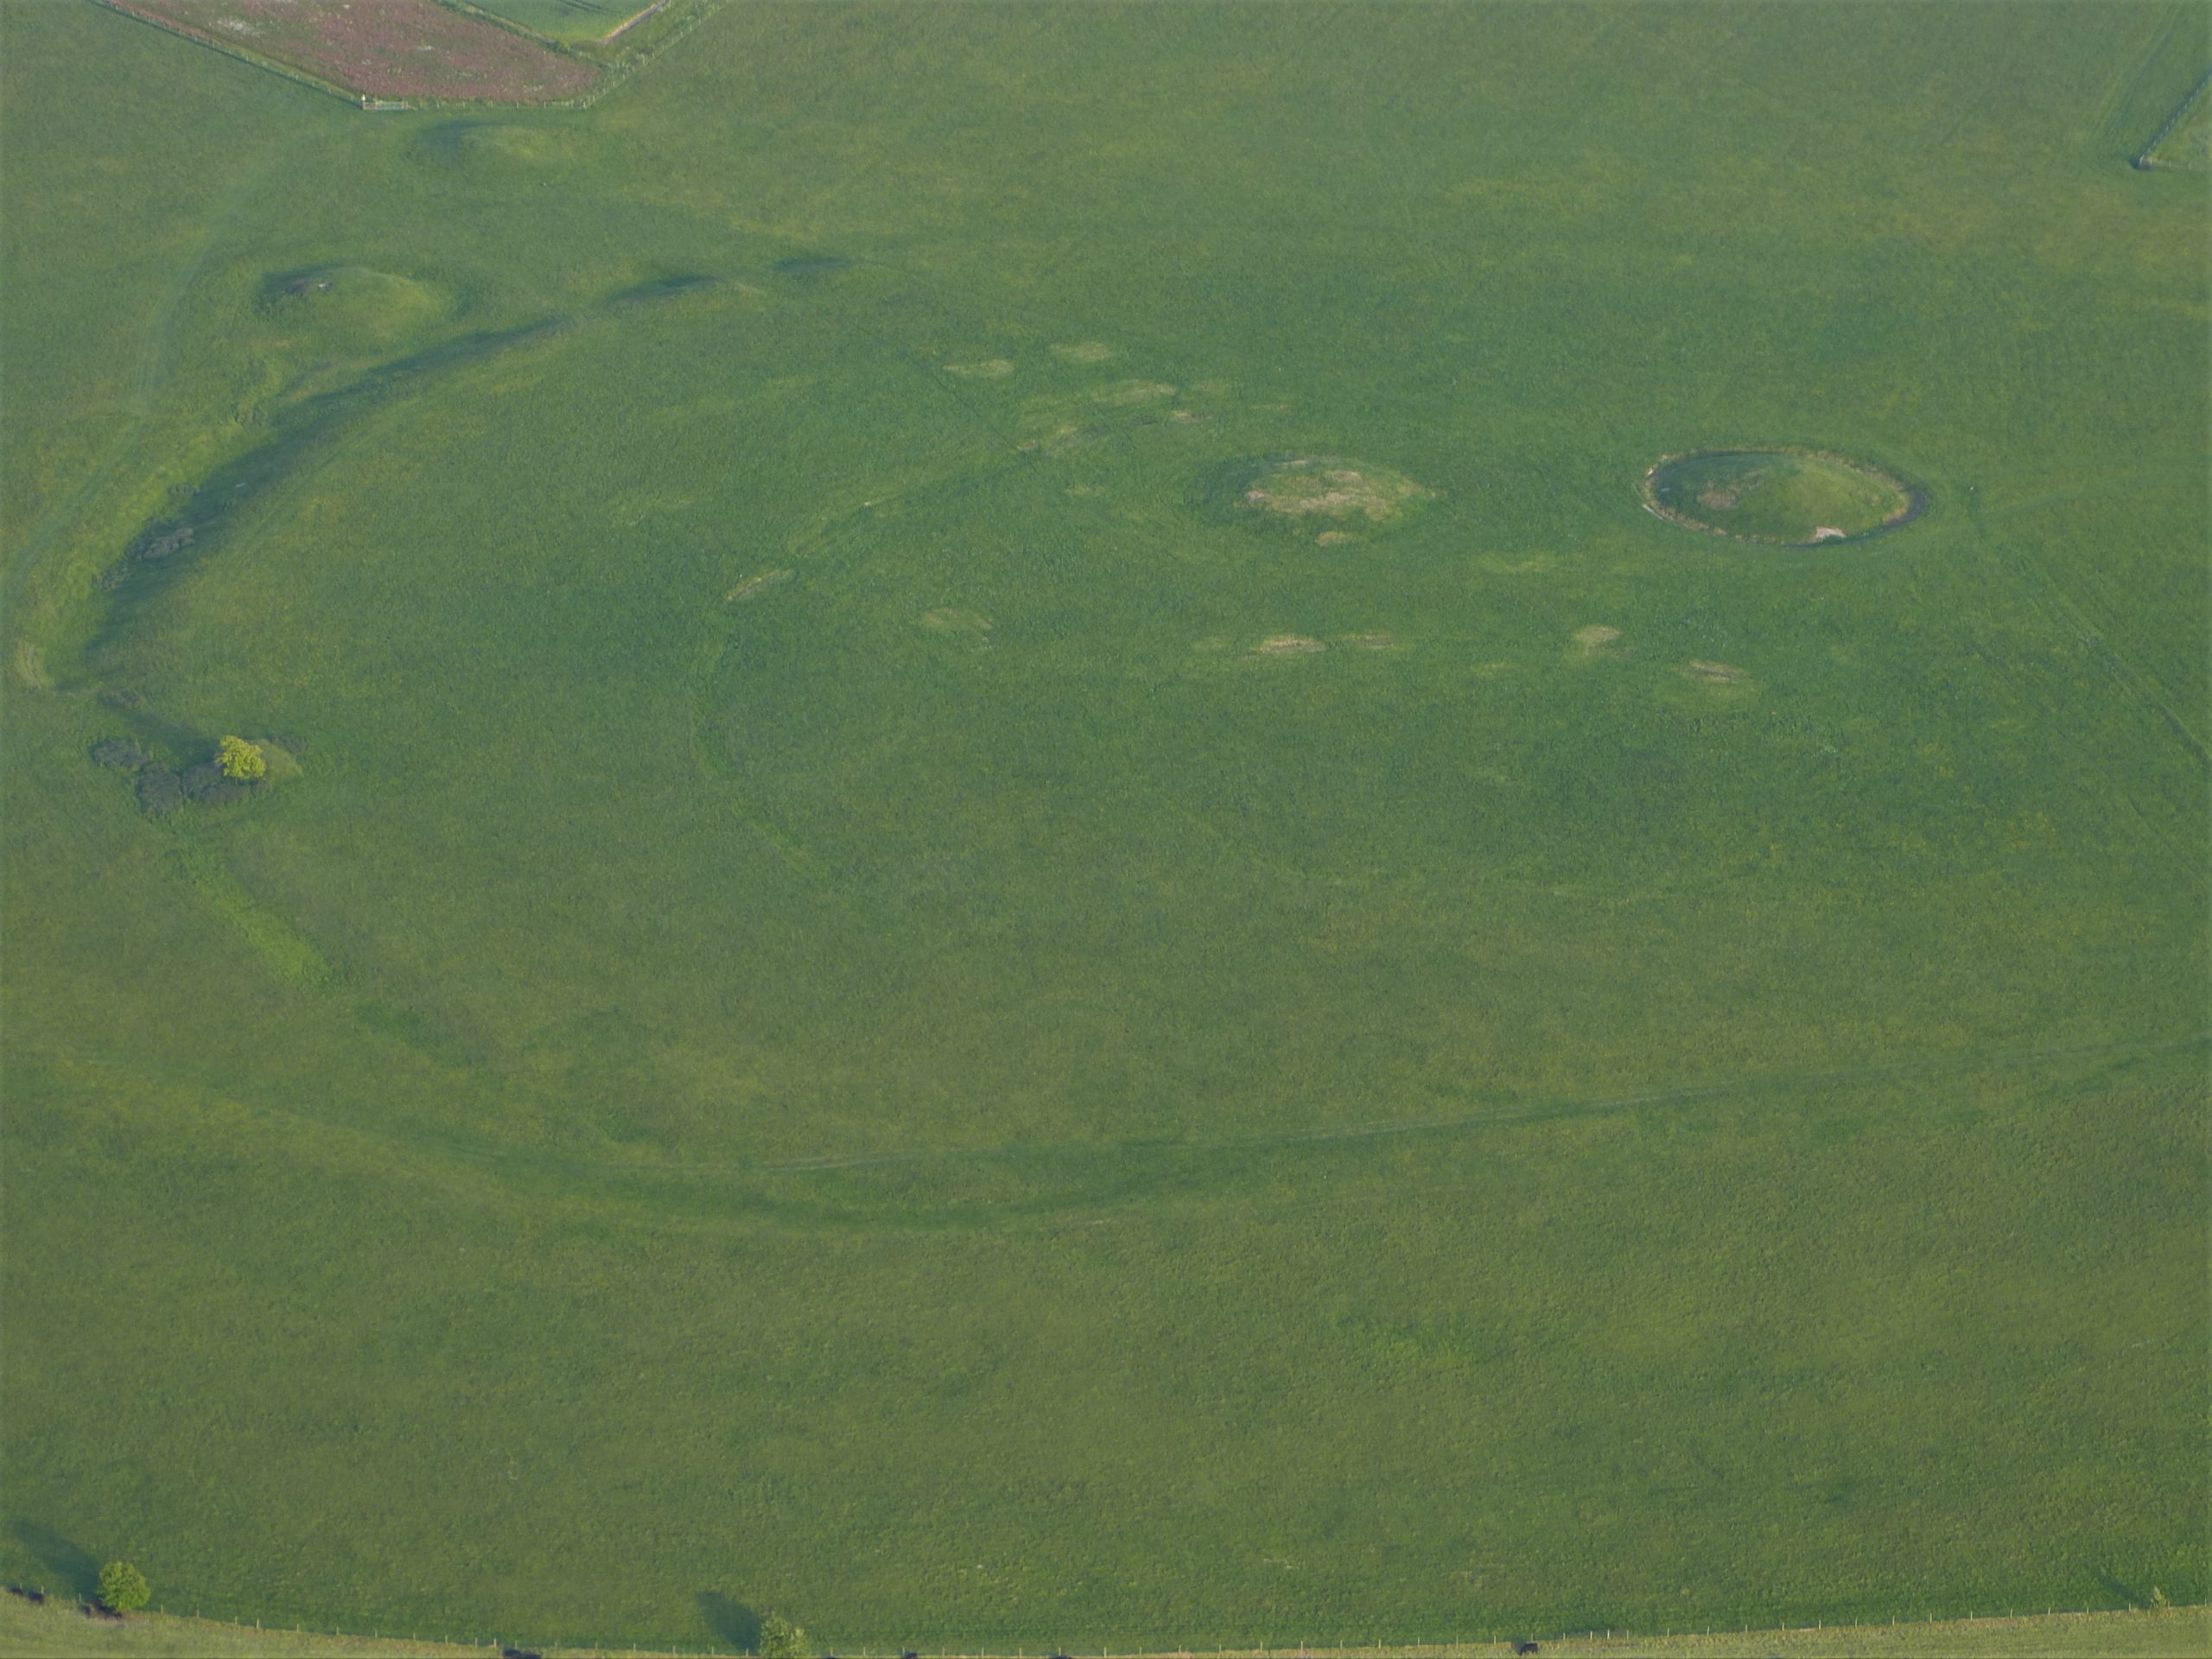 Windmill Hill causewayed enclosure from the air